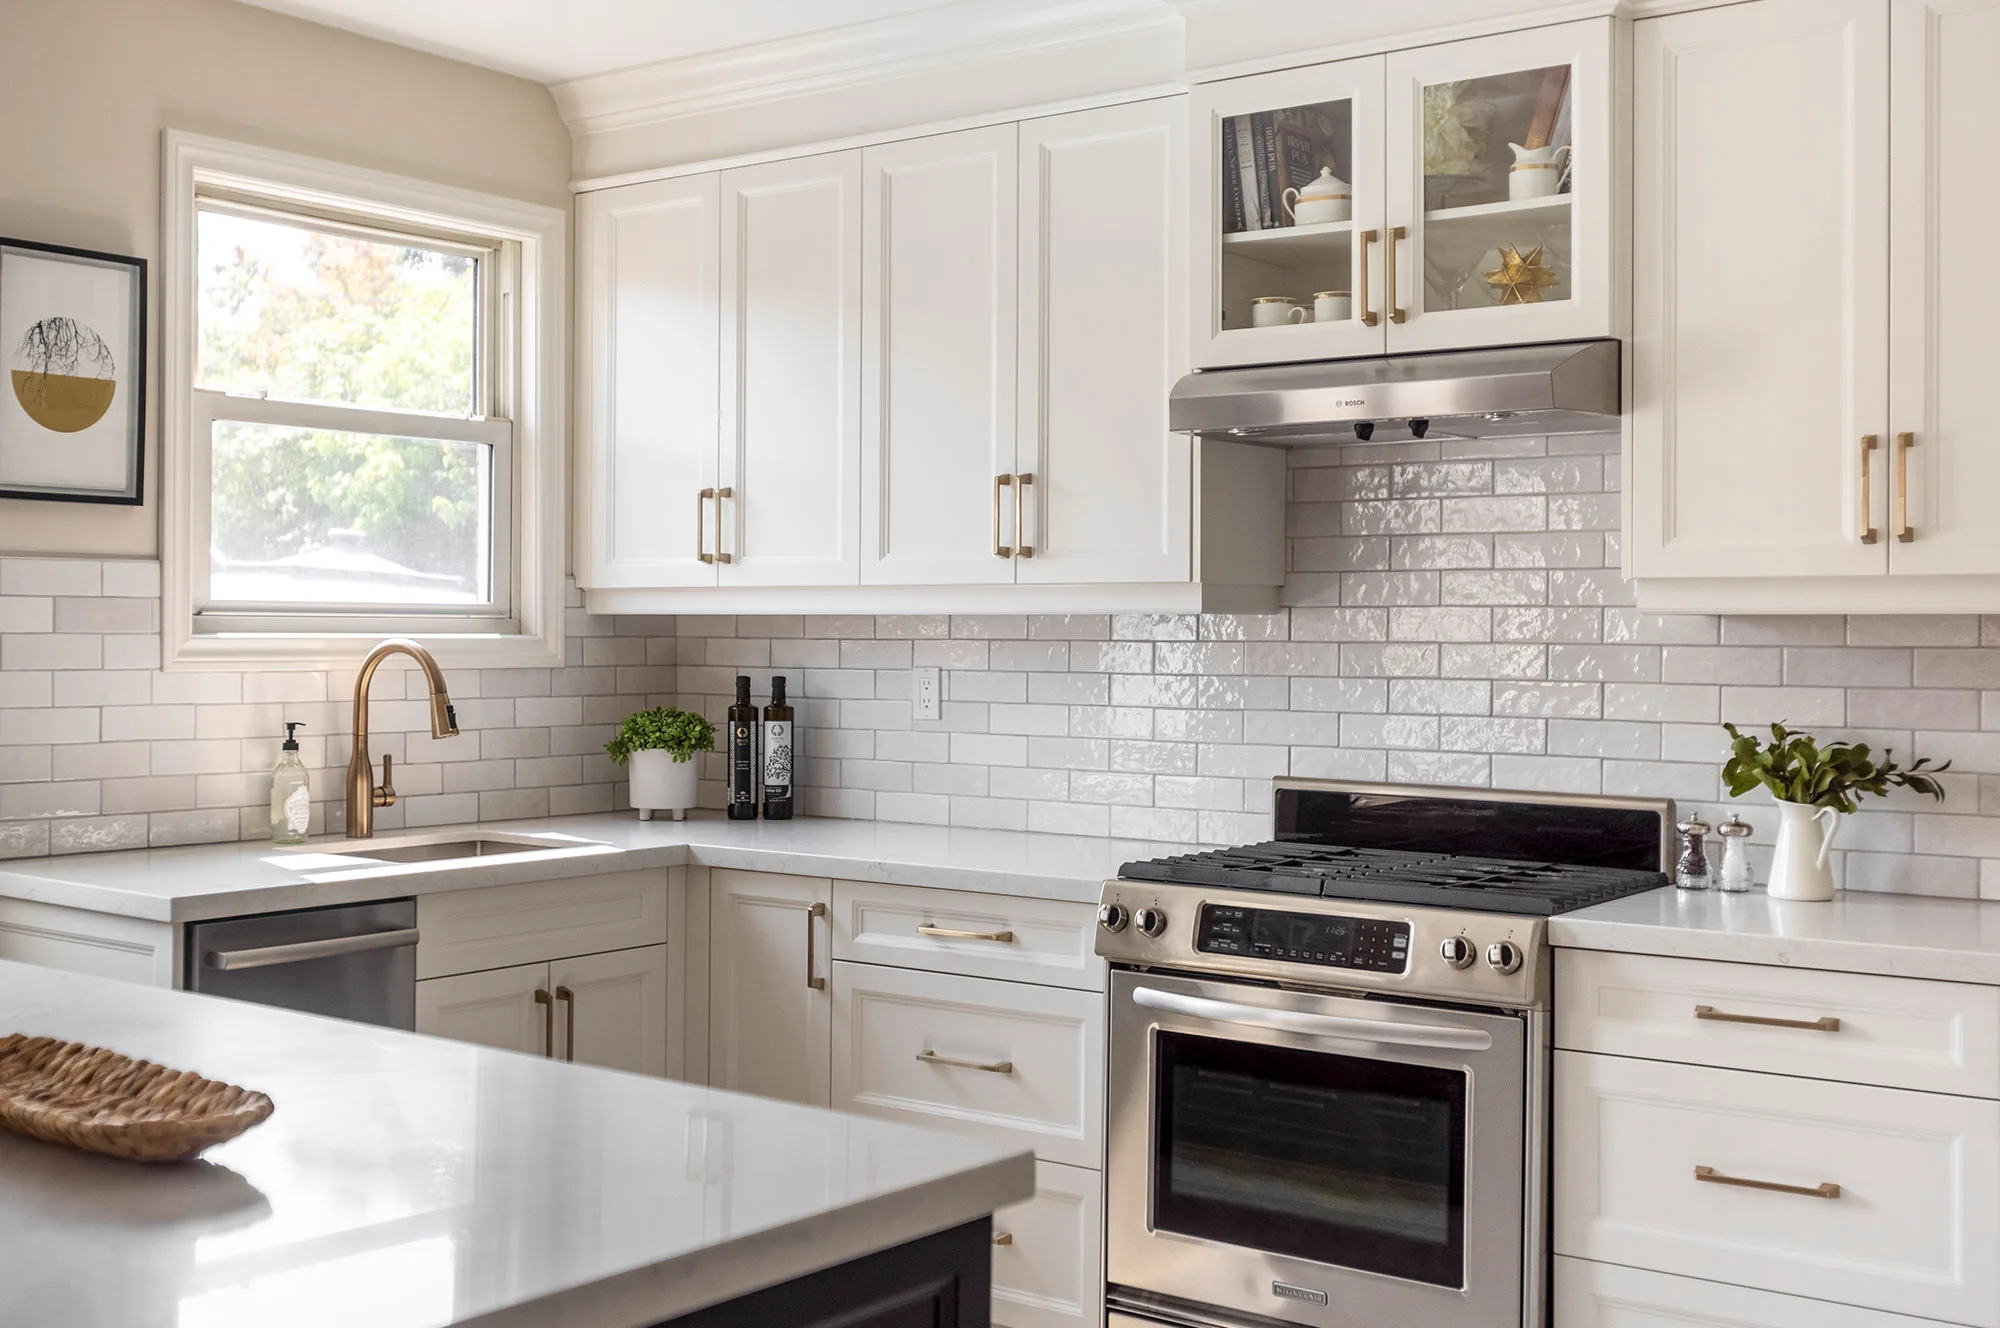 A kitchen with white upper and lower cupboards with silver handles with a stainless steel oven and hood with white and light grey subway tile backsplash